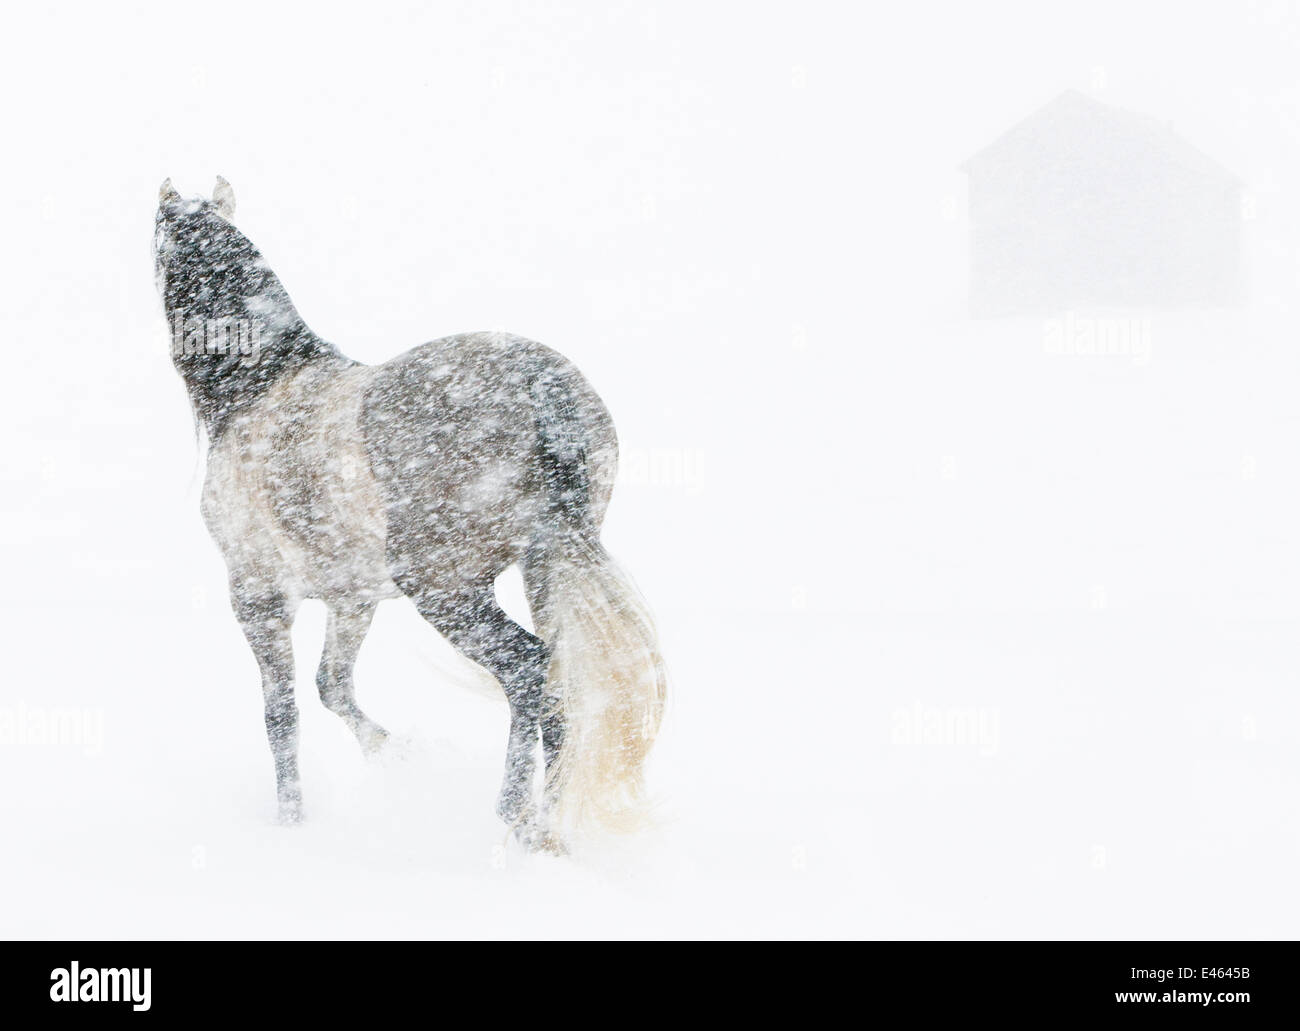 Horse in snow storm with shed in background, USA Stock Photo